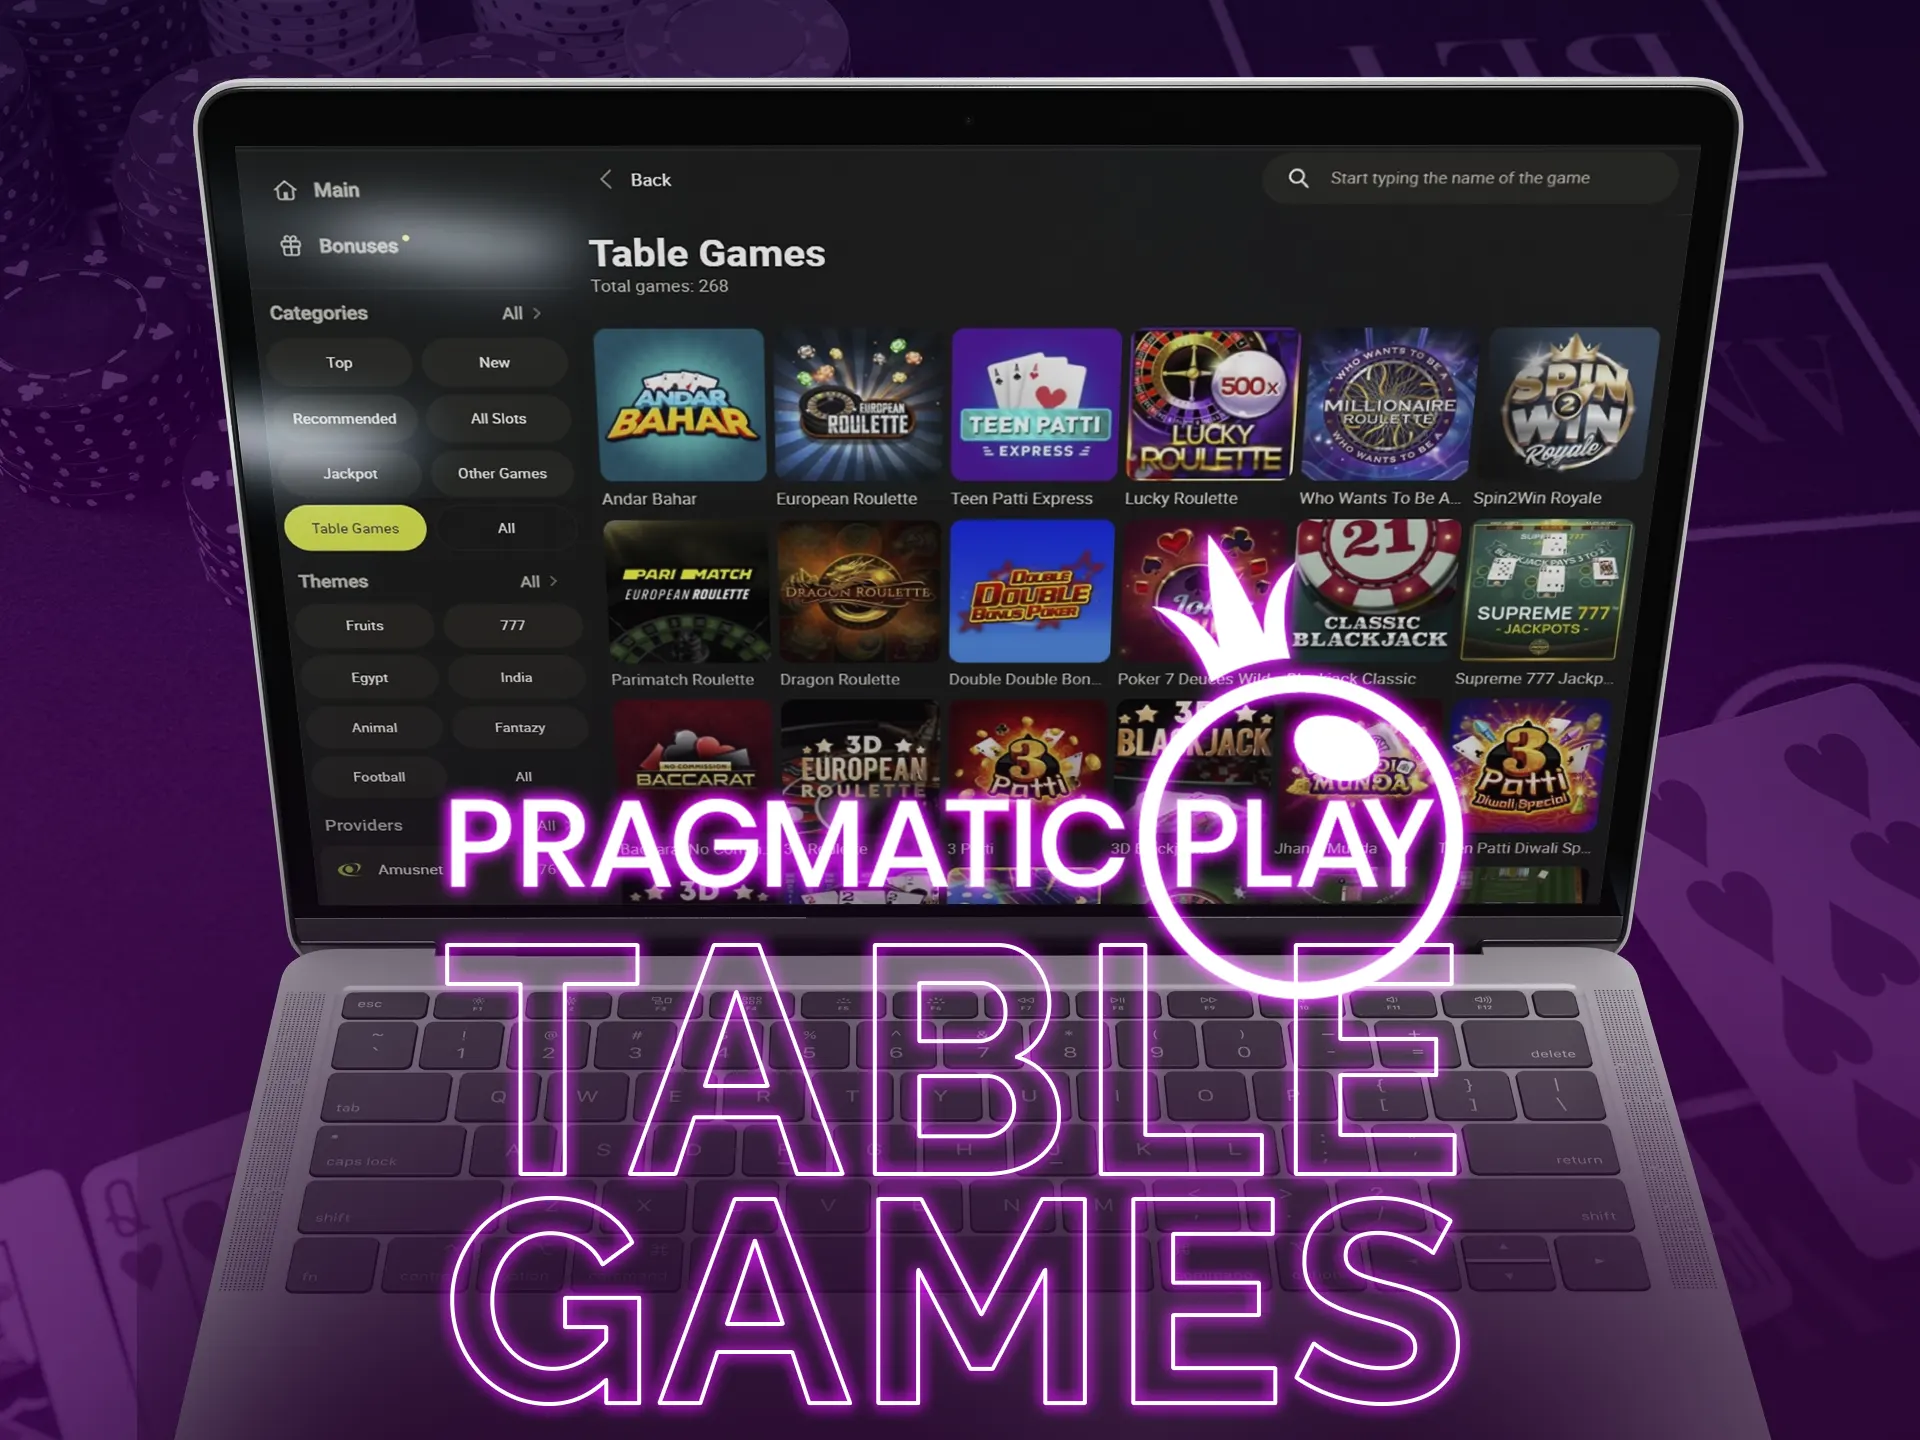 Pragmatic Play offers a diverse collection of classic casino games.